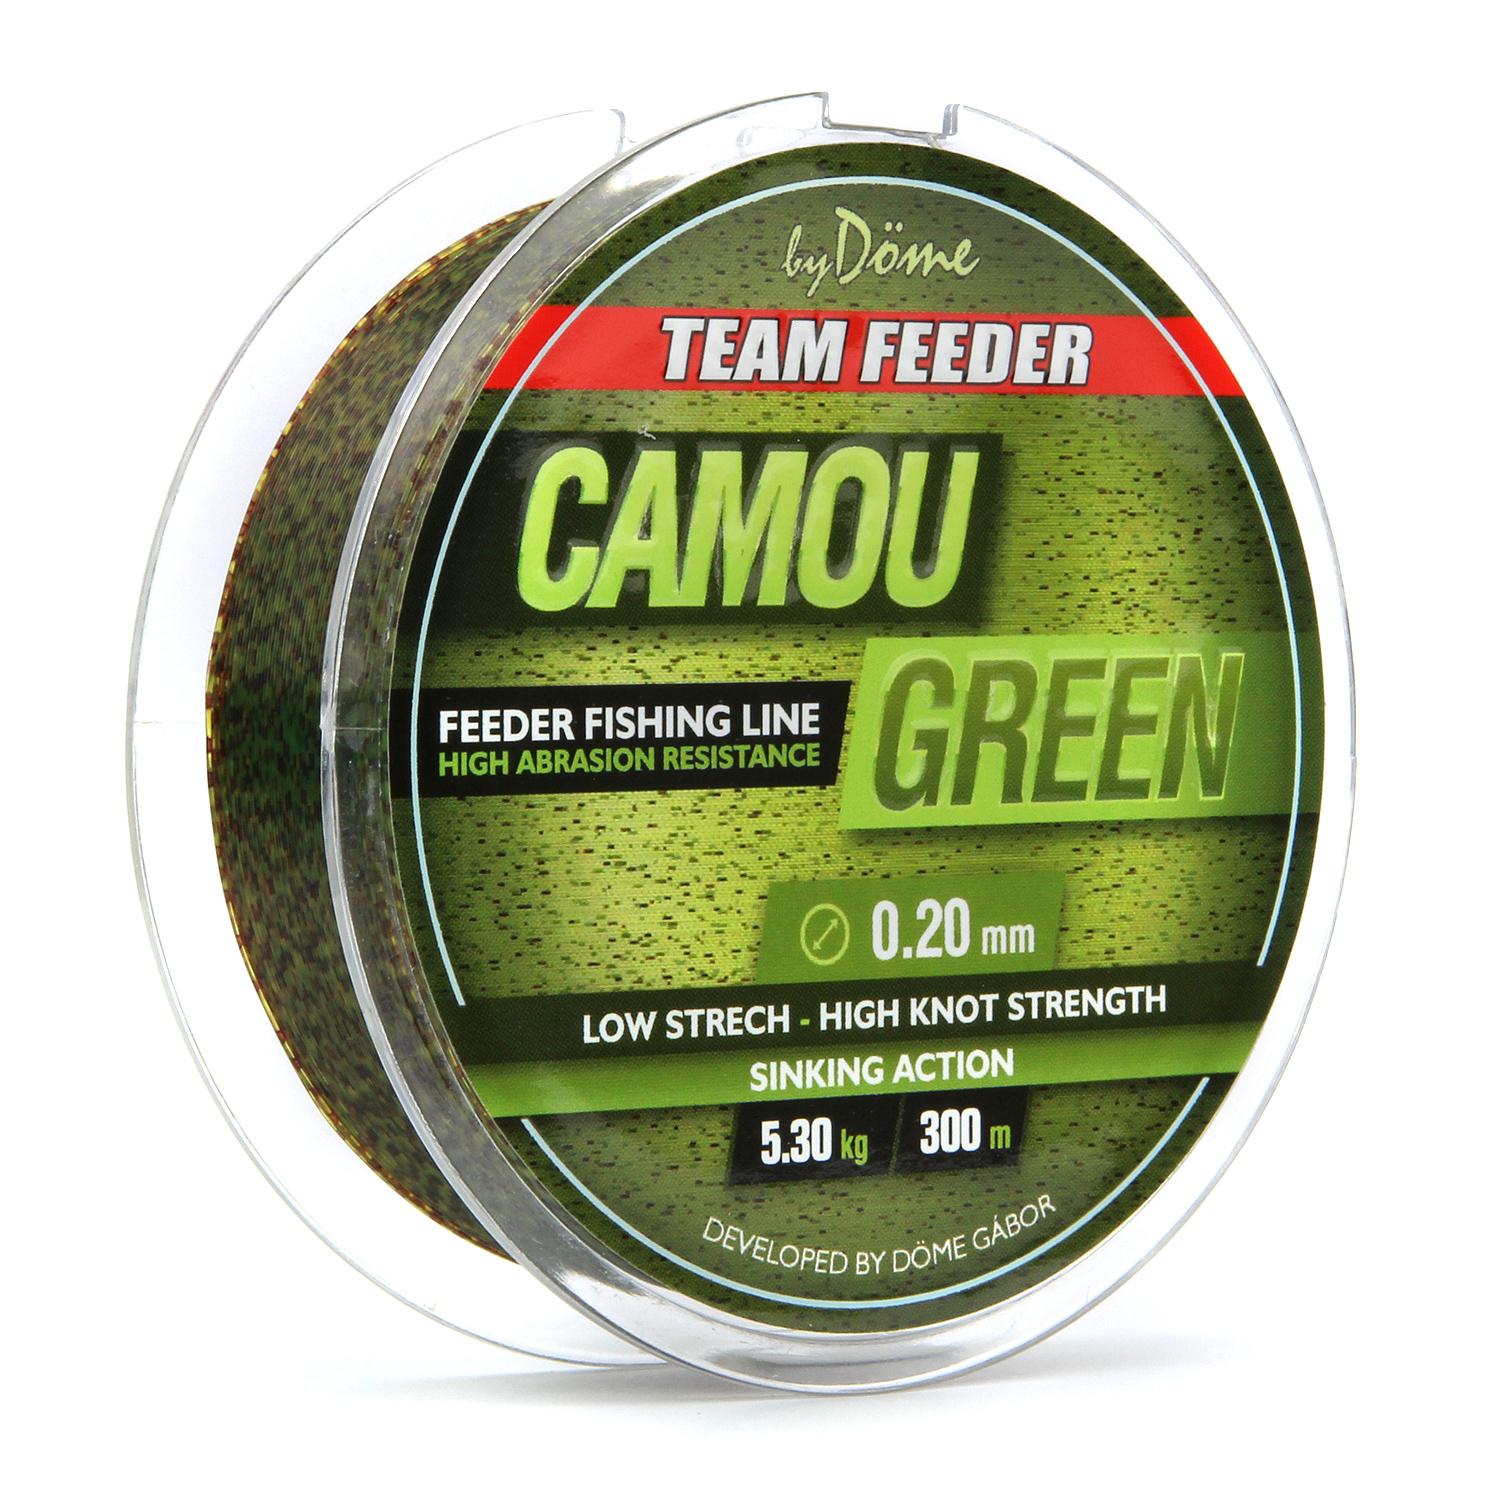 By Dme TF Camou Green 300m 0.22mm